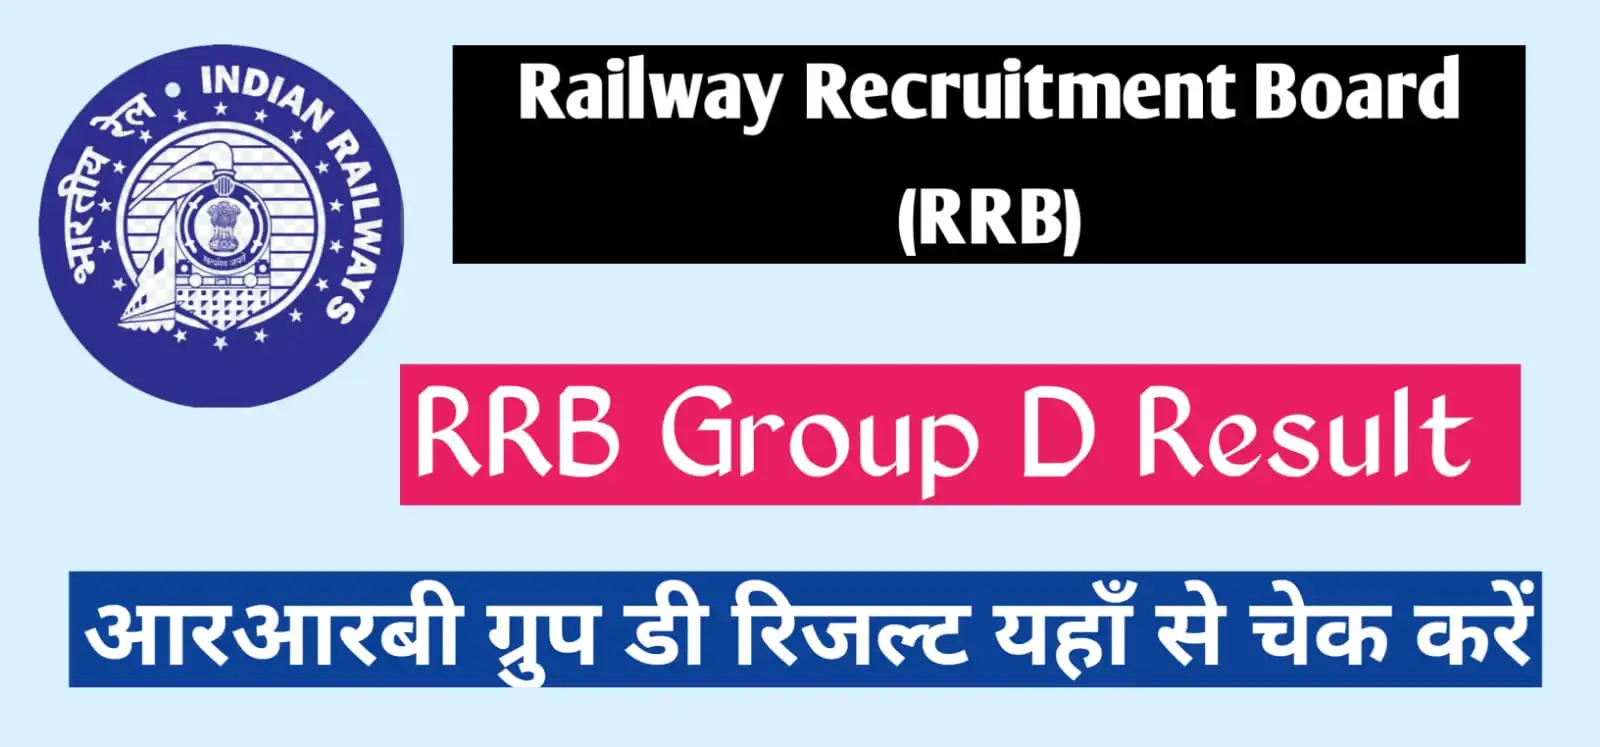 RRB Mumbai Group D Result